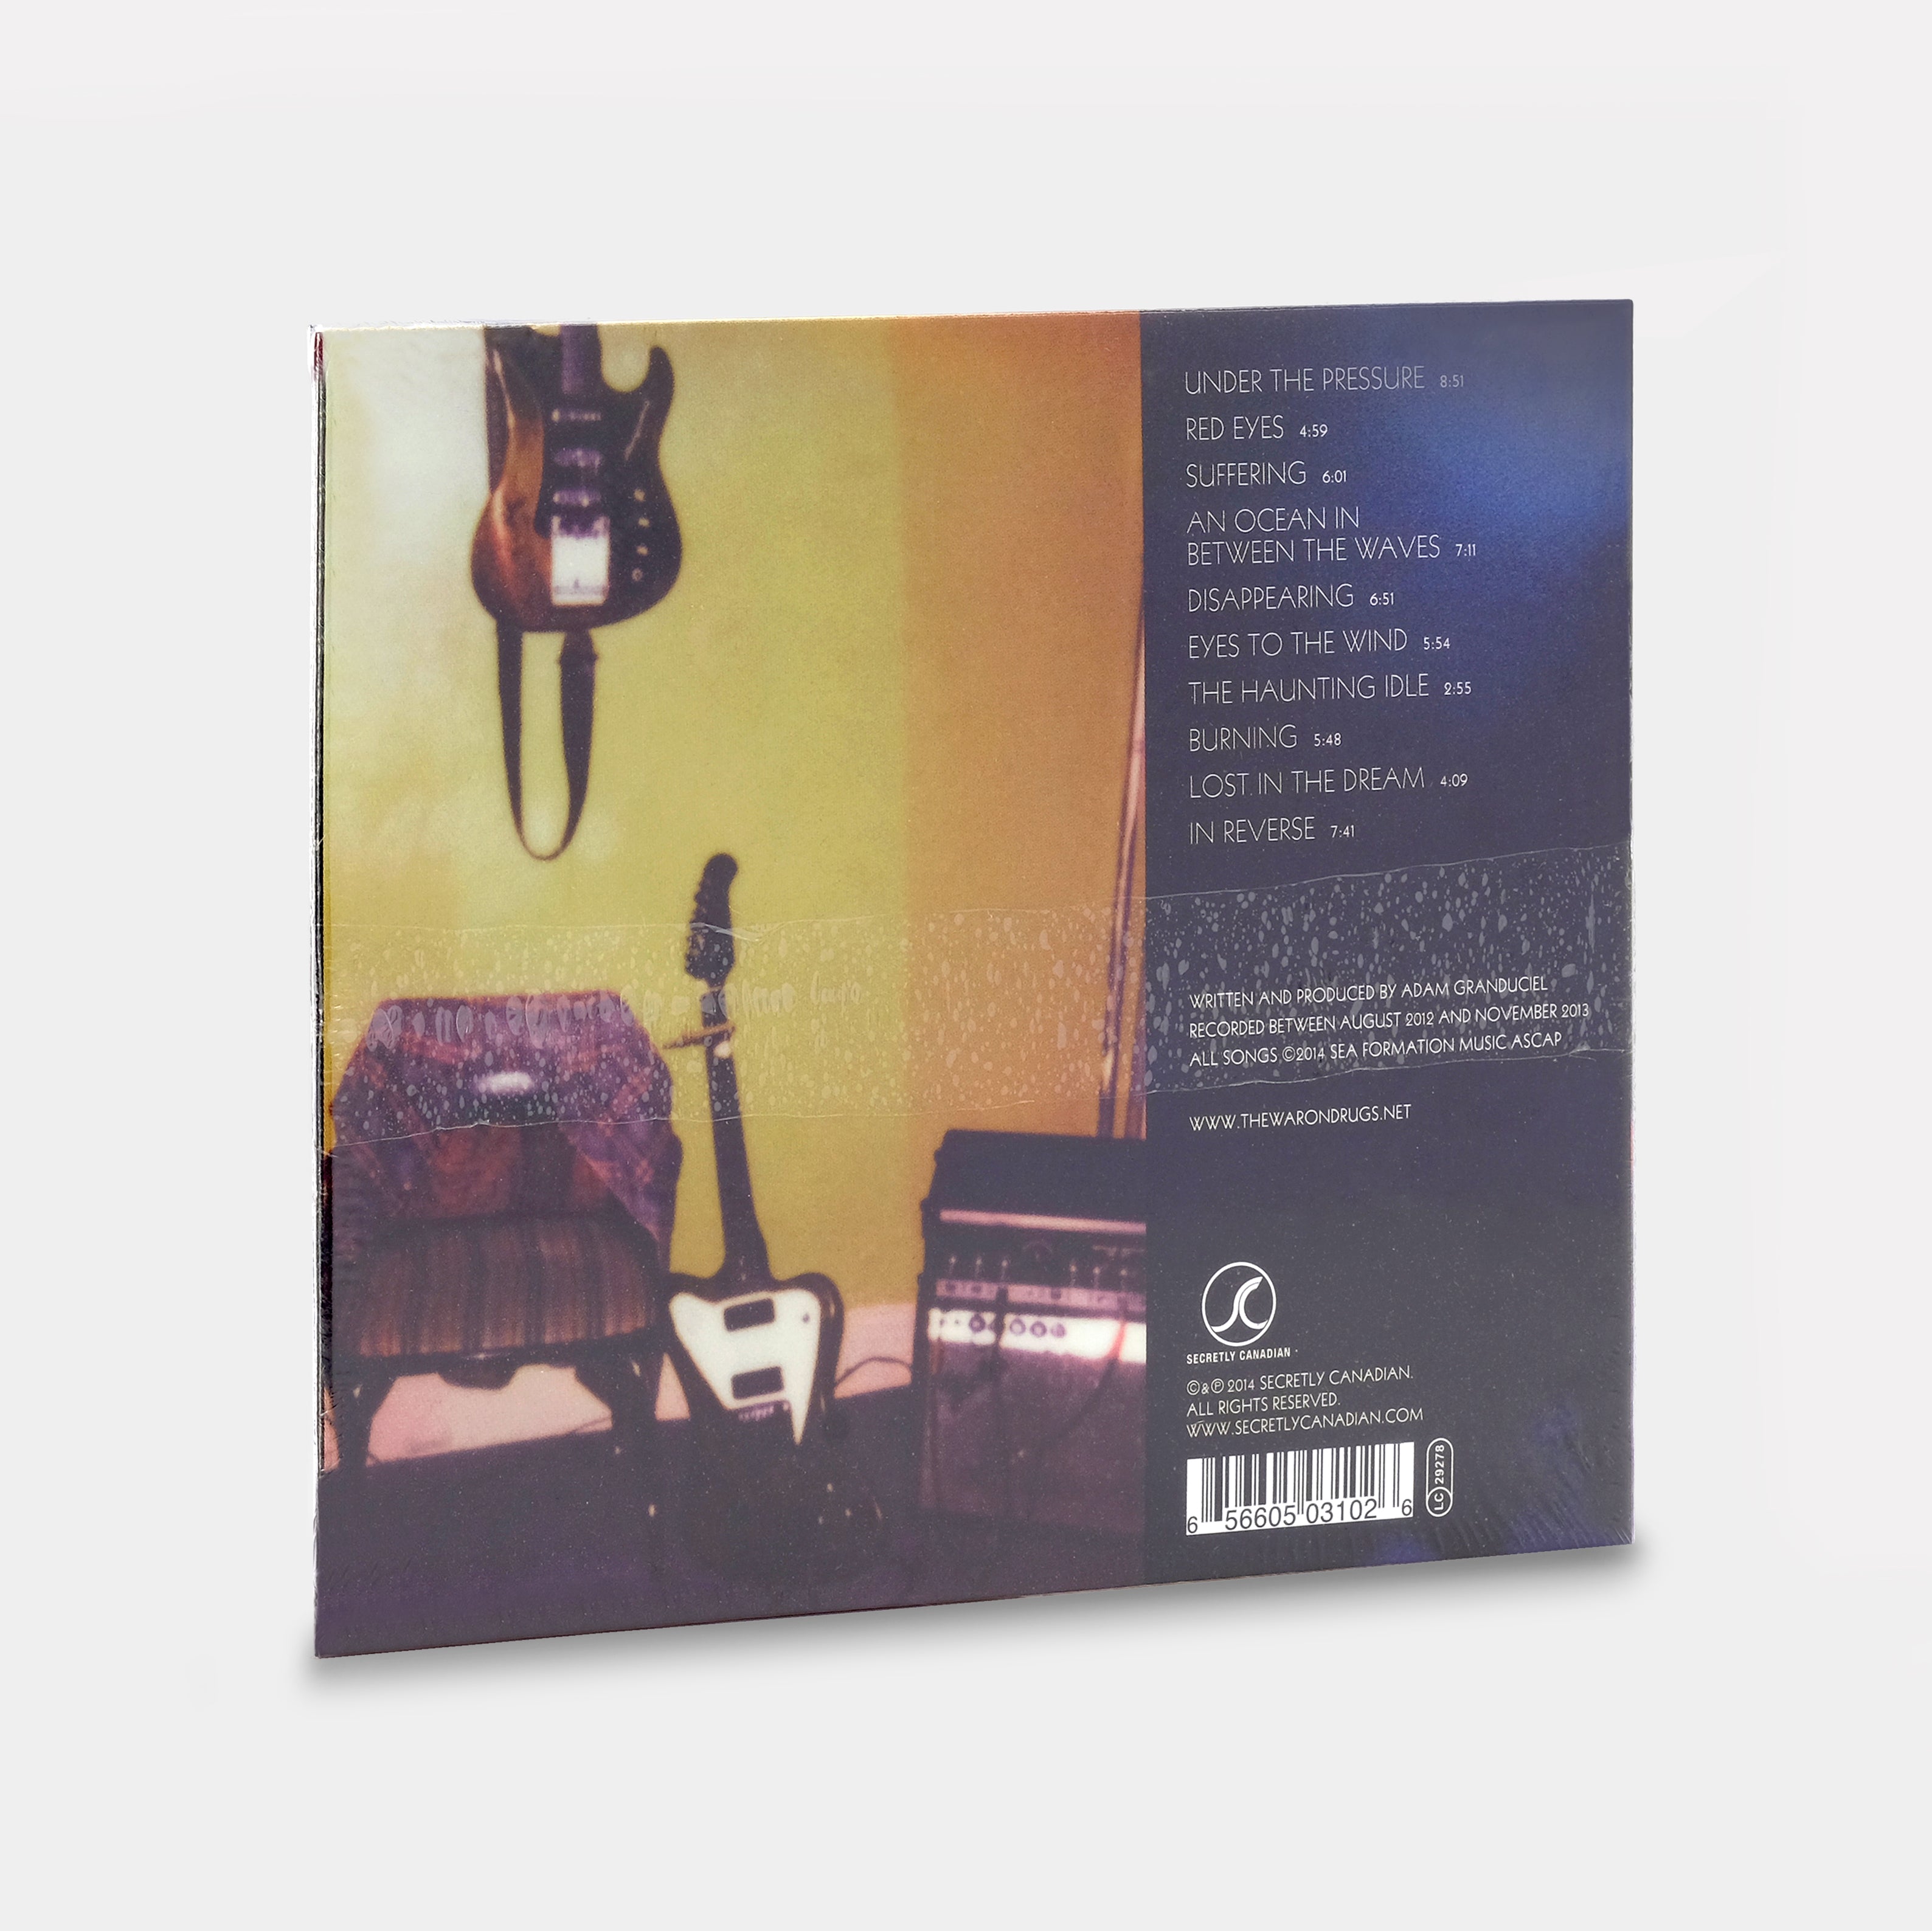 The War On Drugs - Lost In The Dream CD